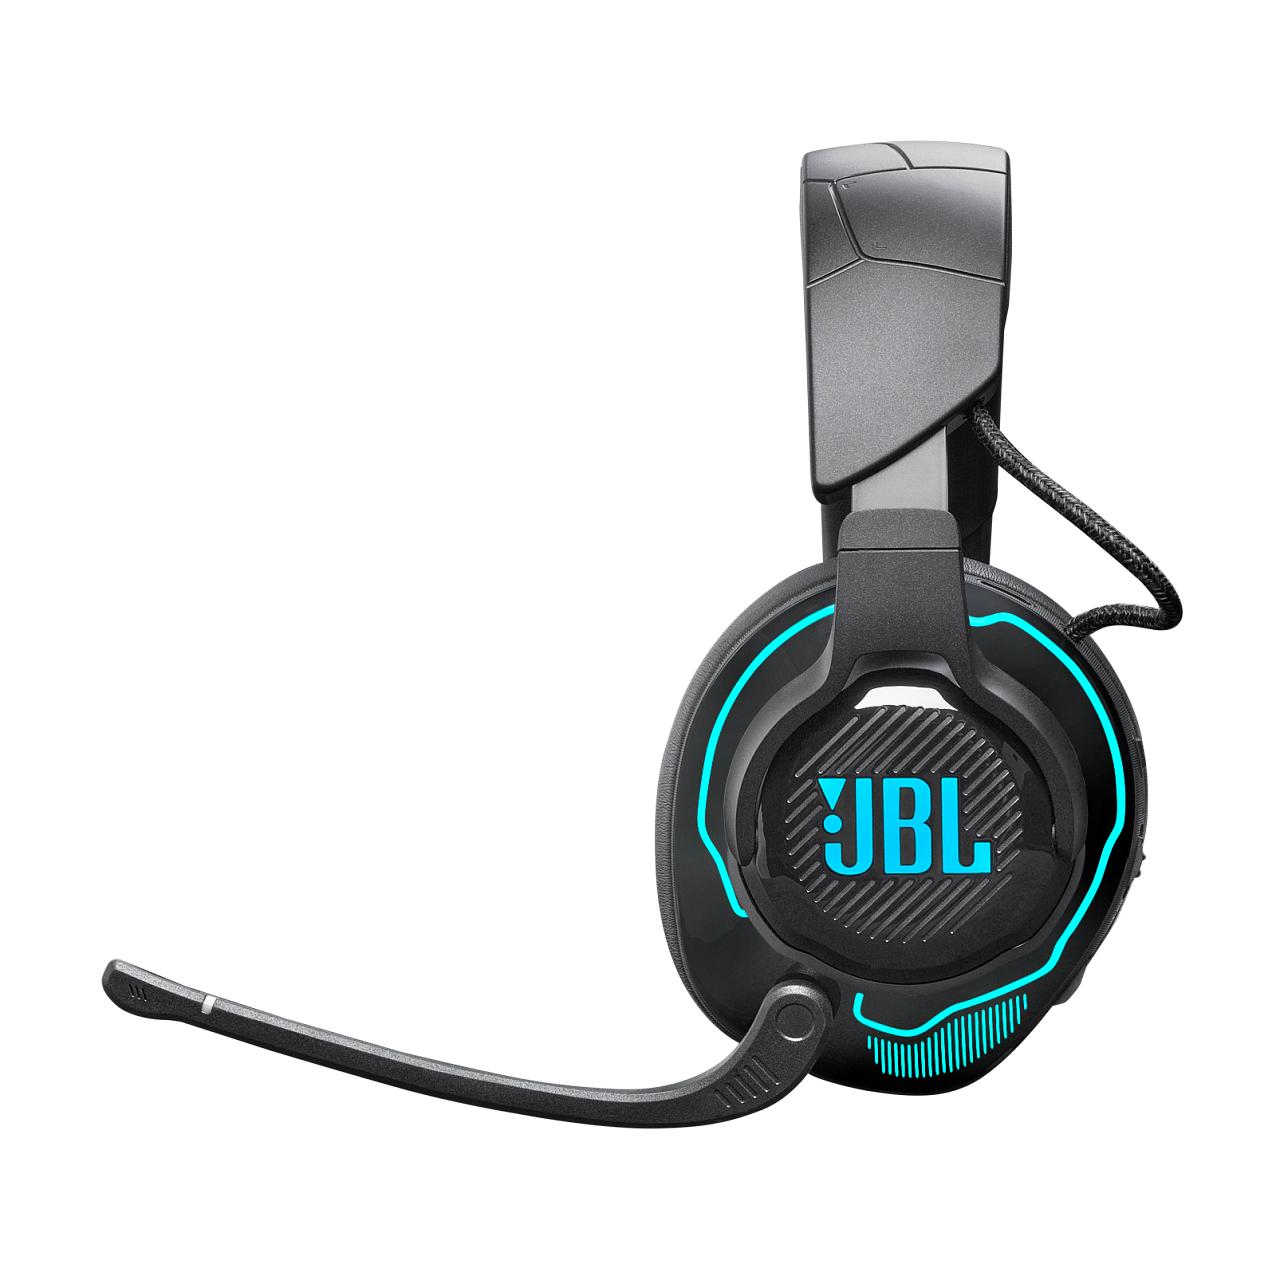 Bluetooth und Switch Quantum 910 XBOX, Headset Headset Handy, Gaming PS4/PS5, Over-ear JBL PC, Black für